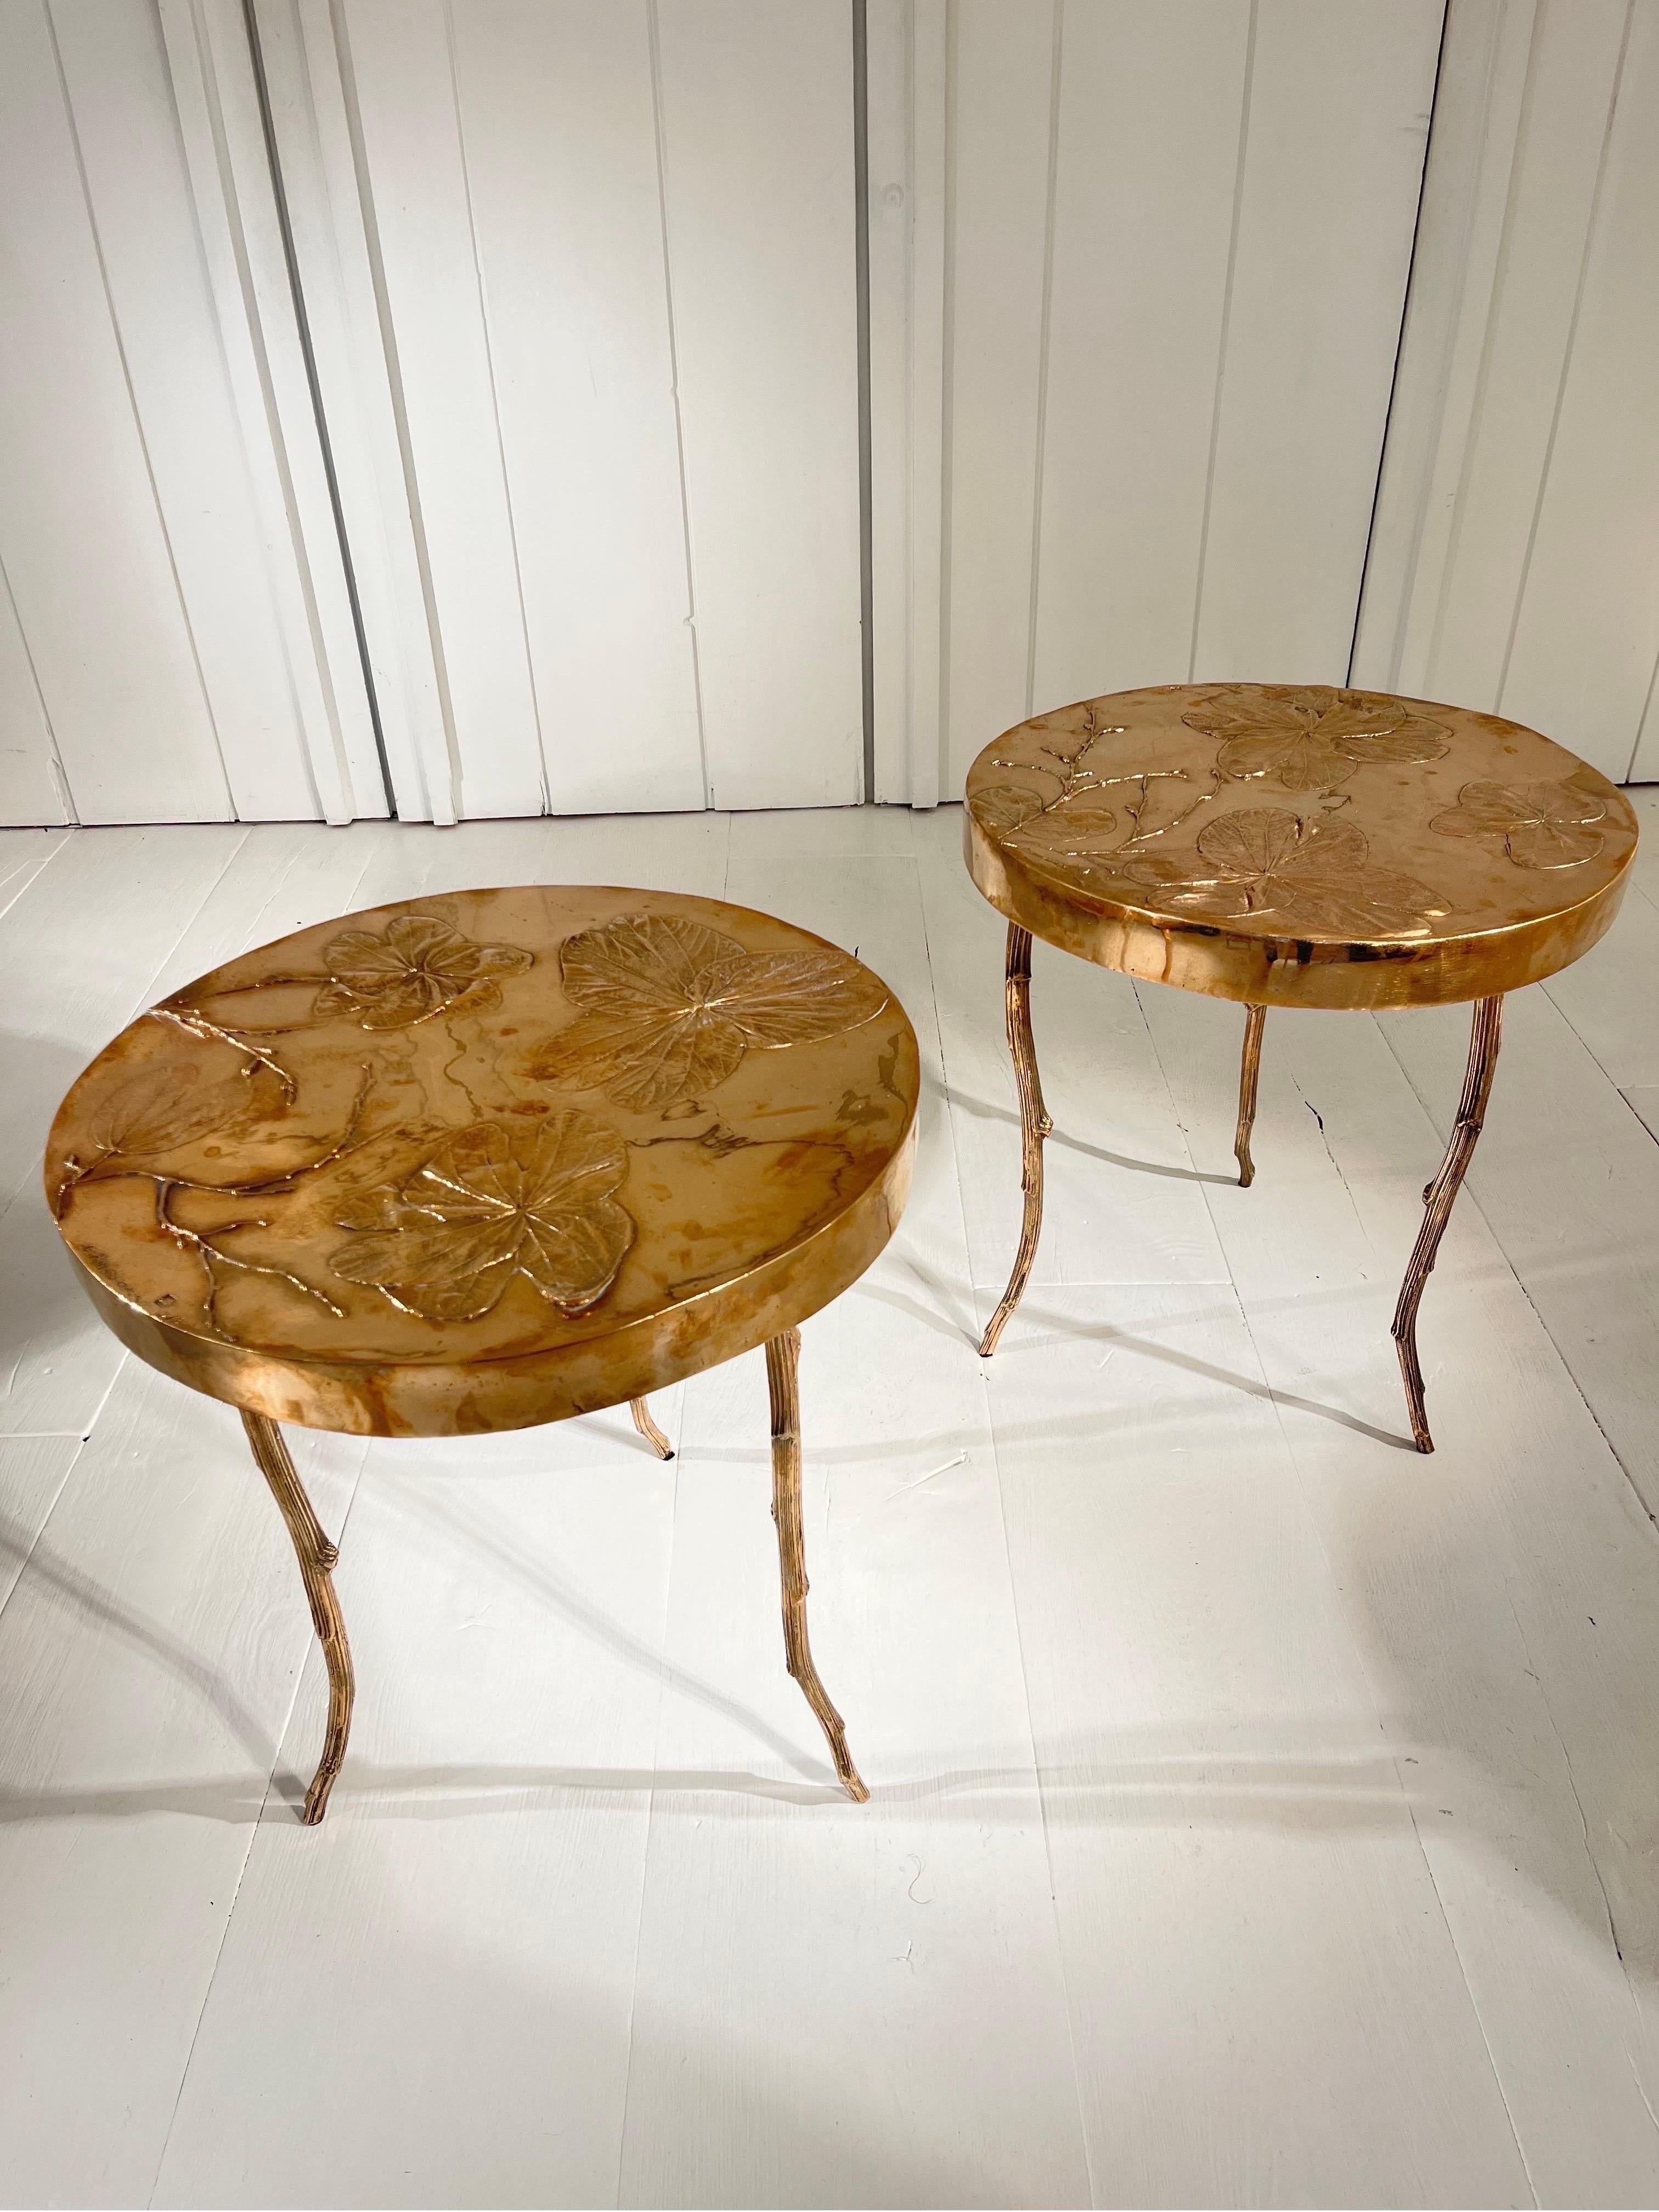 Pair of side tables in bronze  by Clotilde Ancarani
tripode feet and ginko leafs drawings  on the top 
one tanle in stanped and signed 1/1
second table stanped and mark 1/8
perfect condition